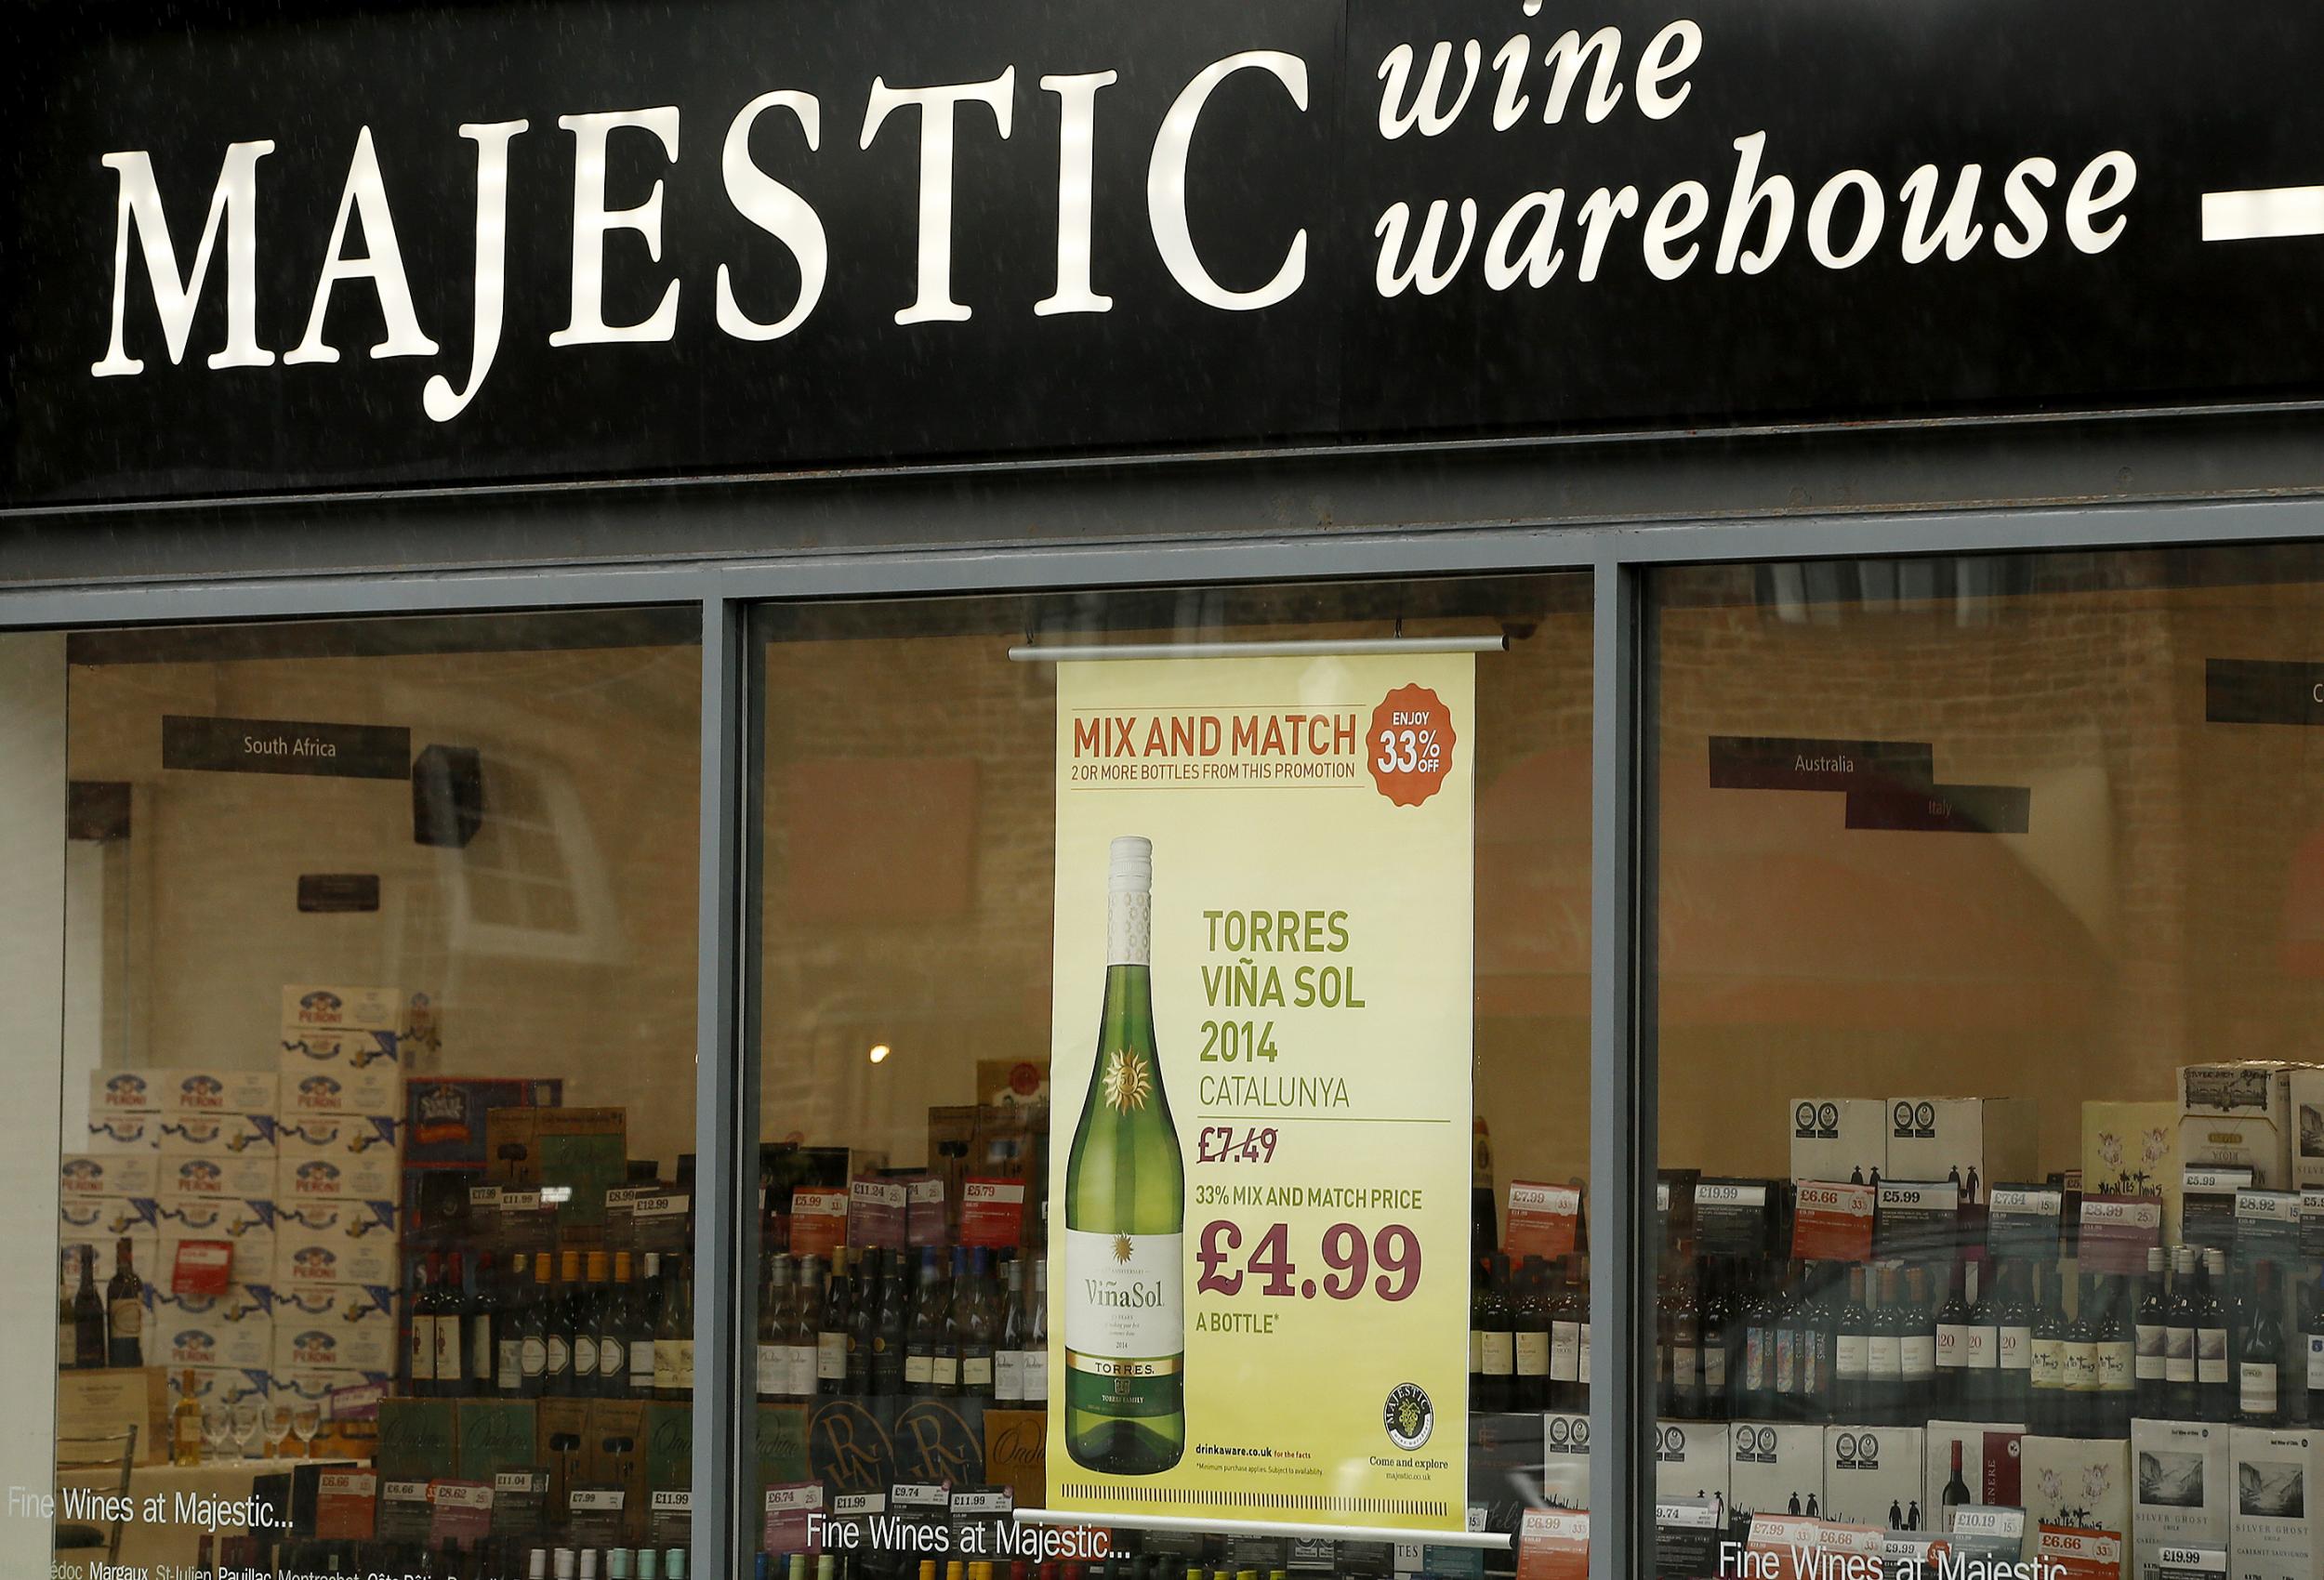 Majestic Wine saw an increase in the number of repeat customers